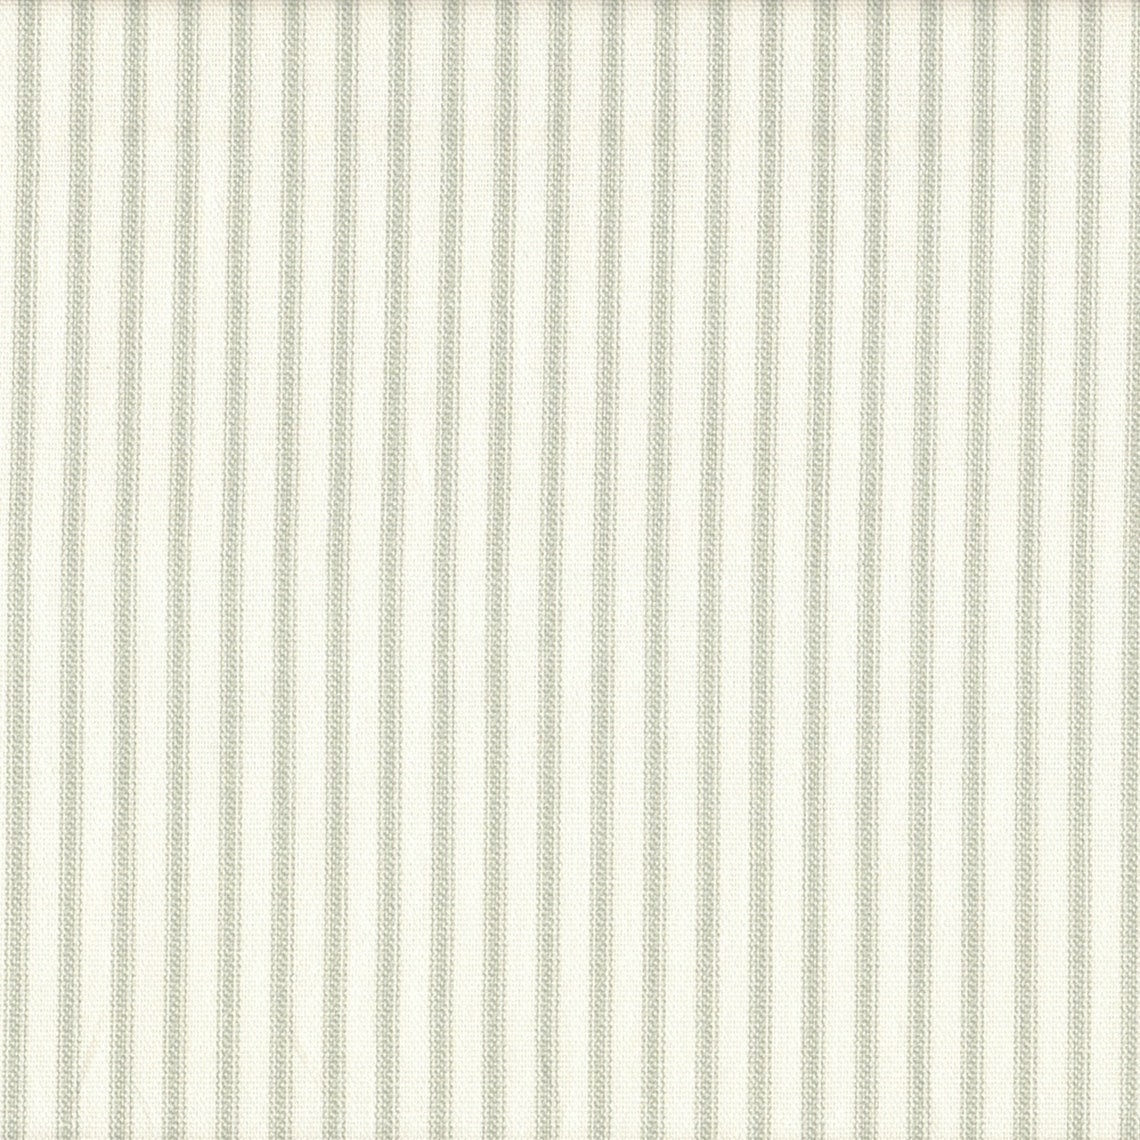 tailored tier cafe curtain panels pair in farmhouse pale sage green ticking stripe on cream